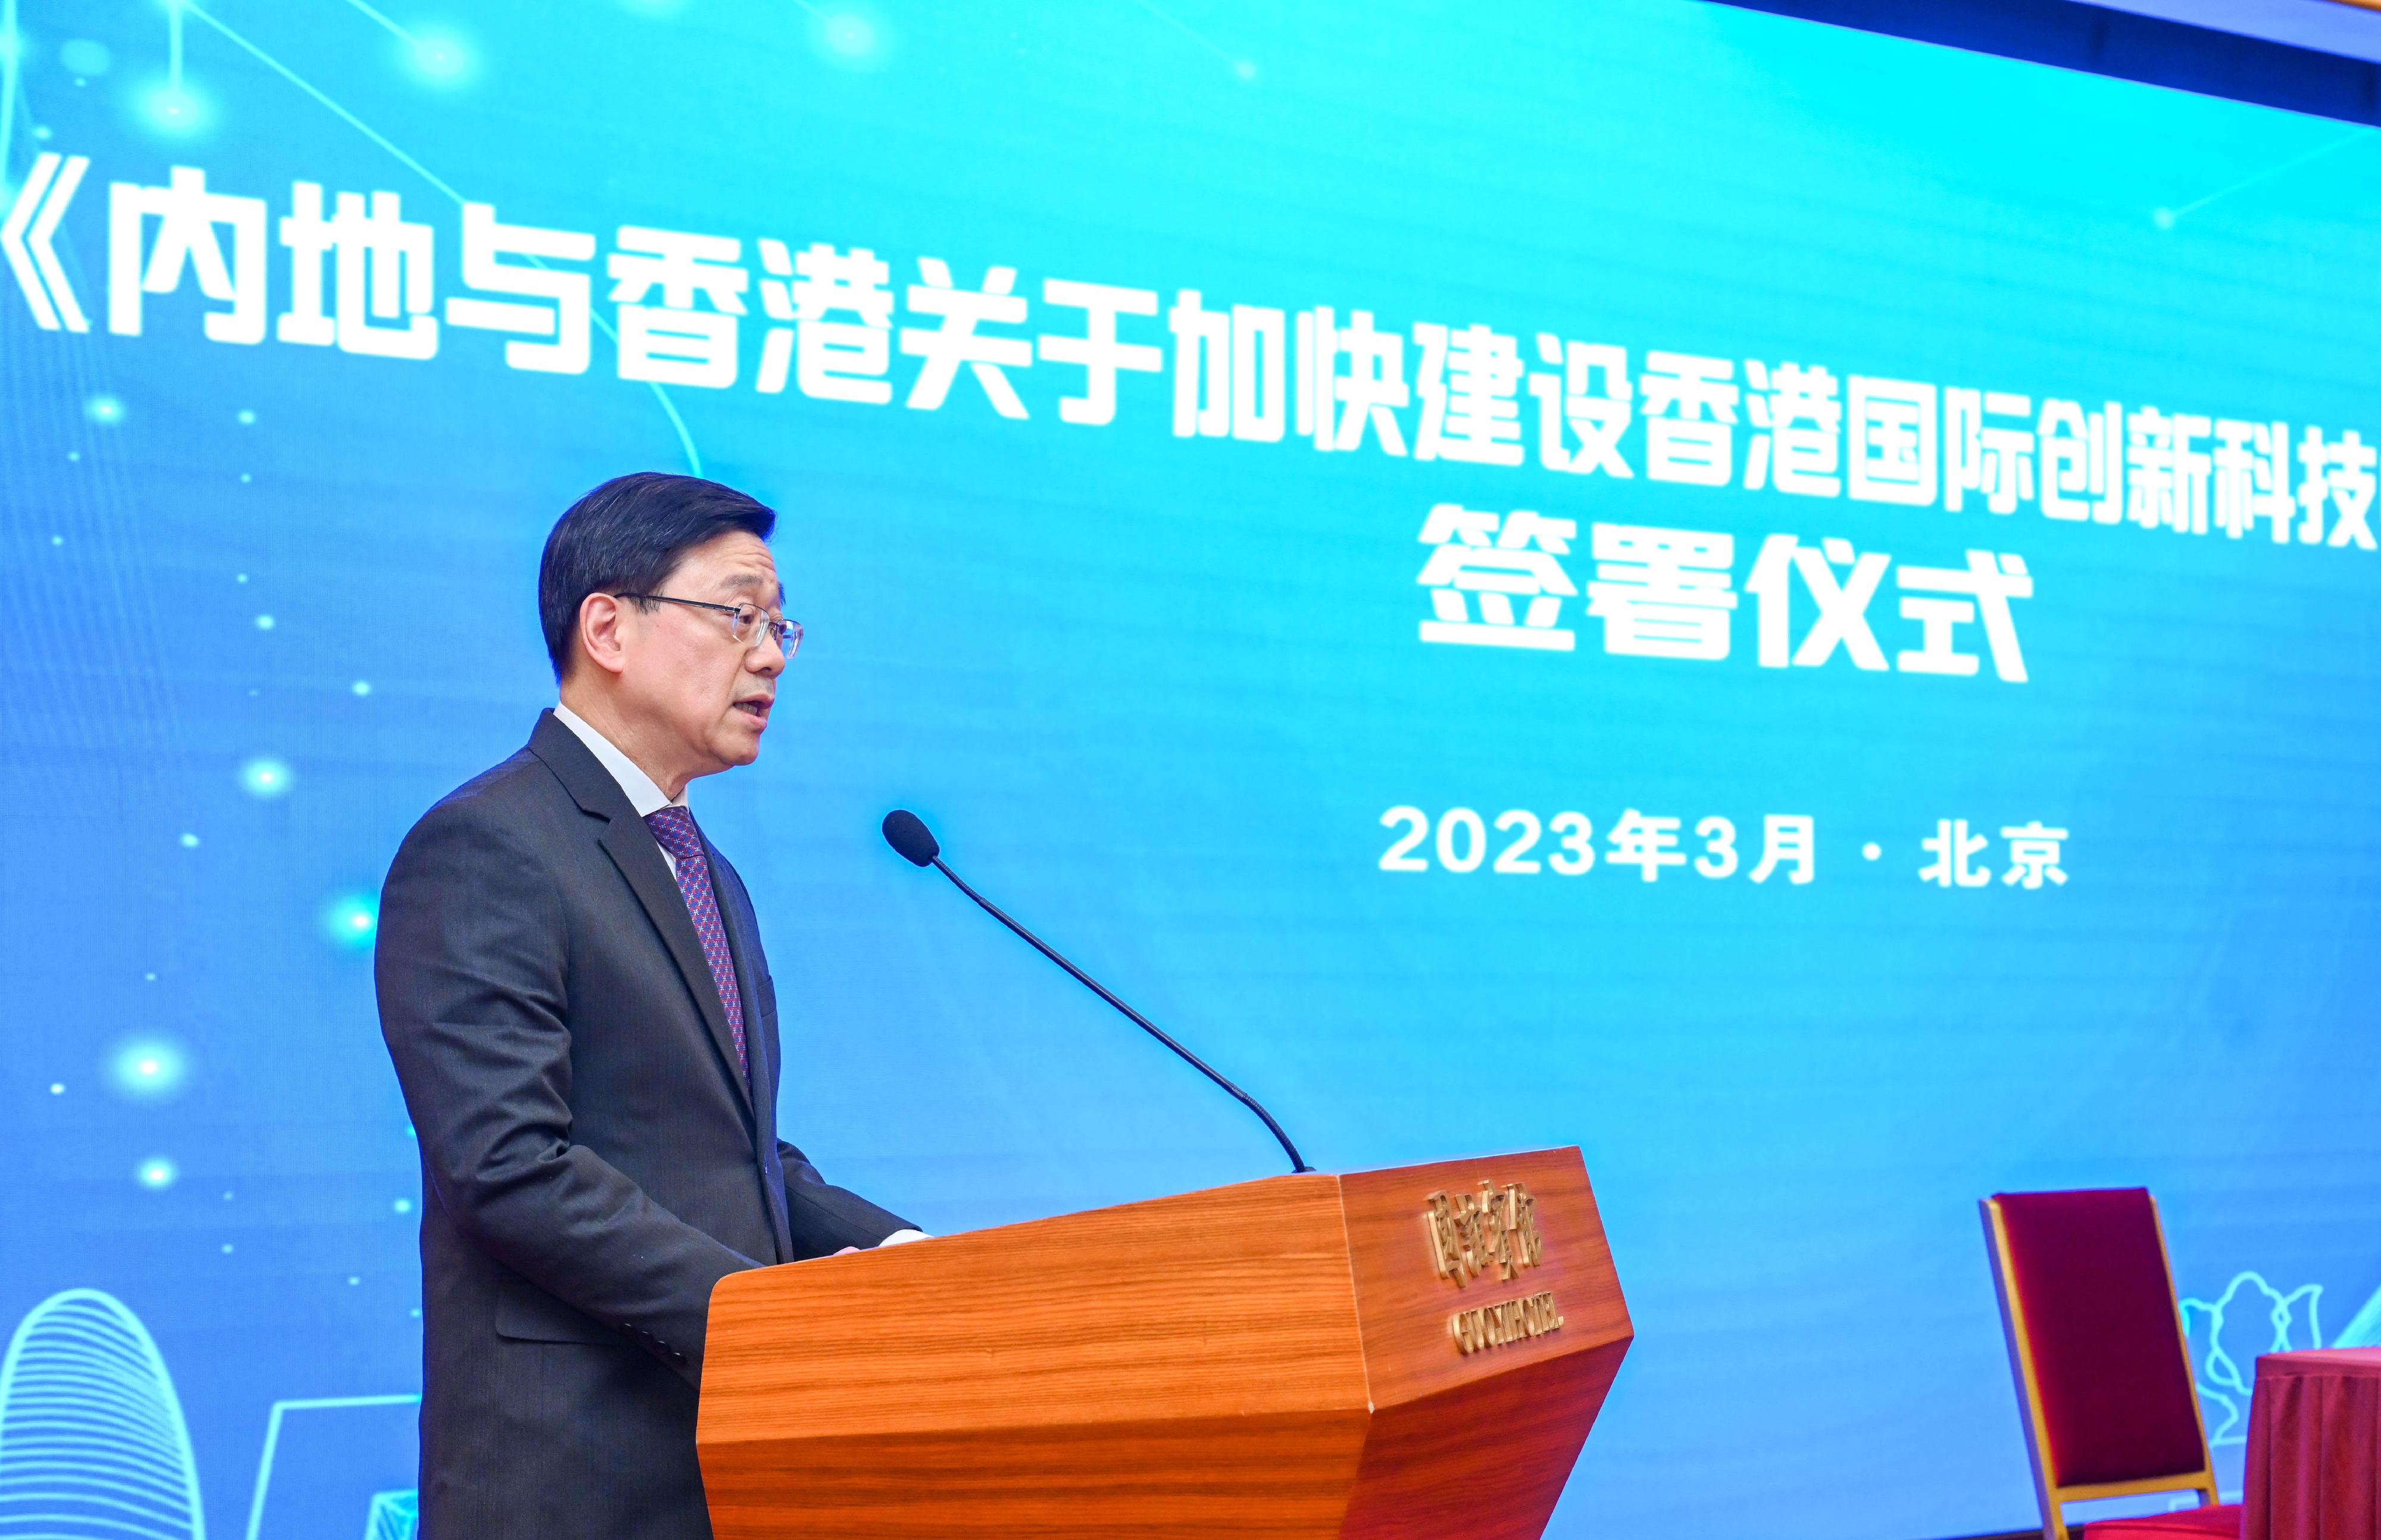 The Chief Executive, Mr John Lee, speaks at the signing ceremony of "Arrangement between the Mainland and Hong Kong on Expediting the Development of Hong Kong into an International Innovation and Technology Centre" in Beijing today (March 15).